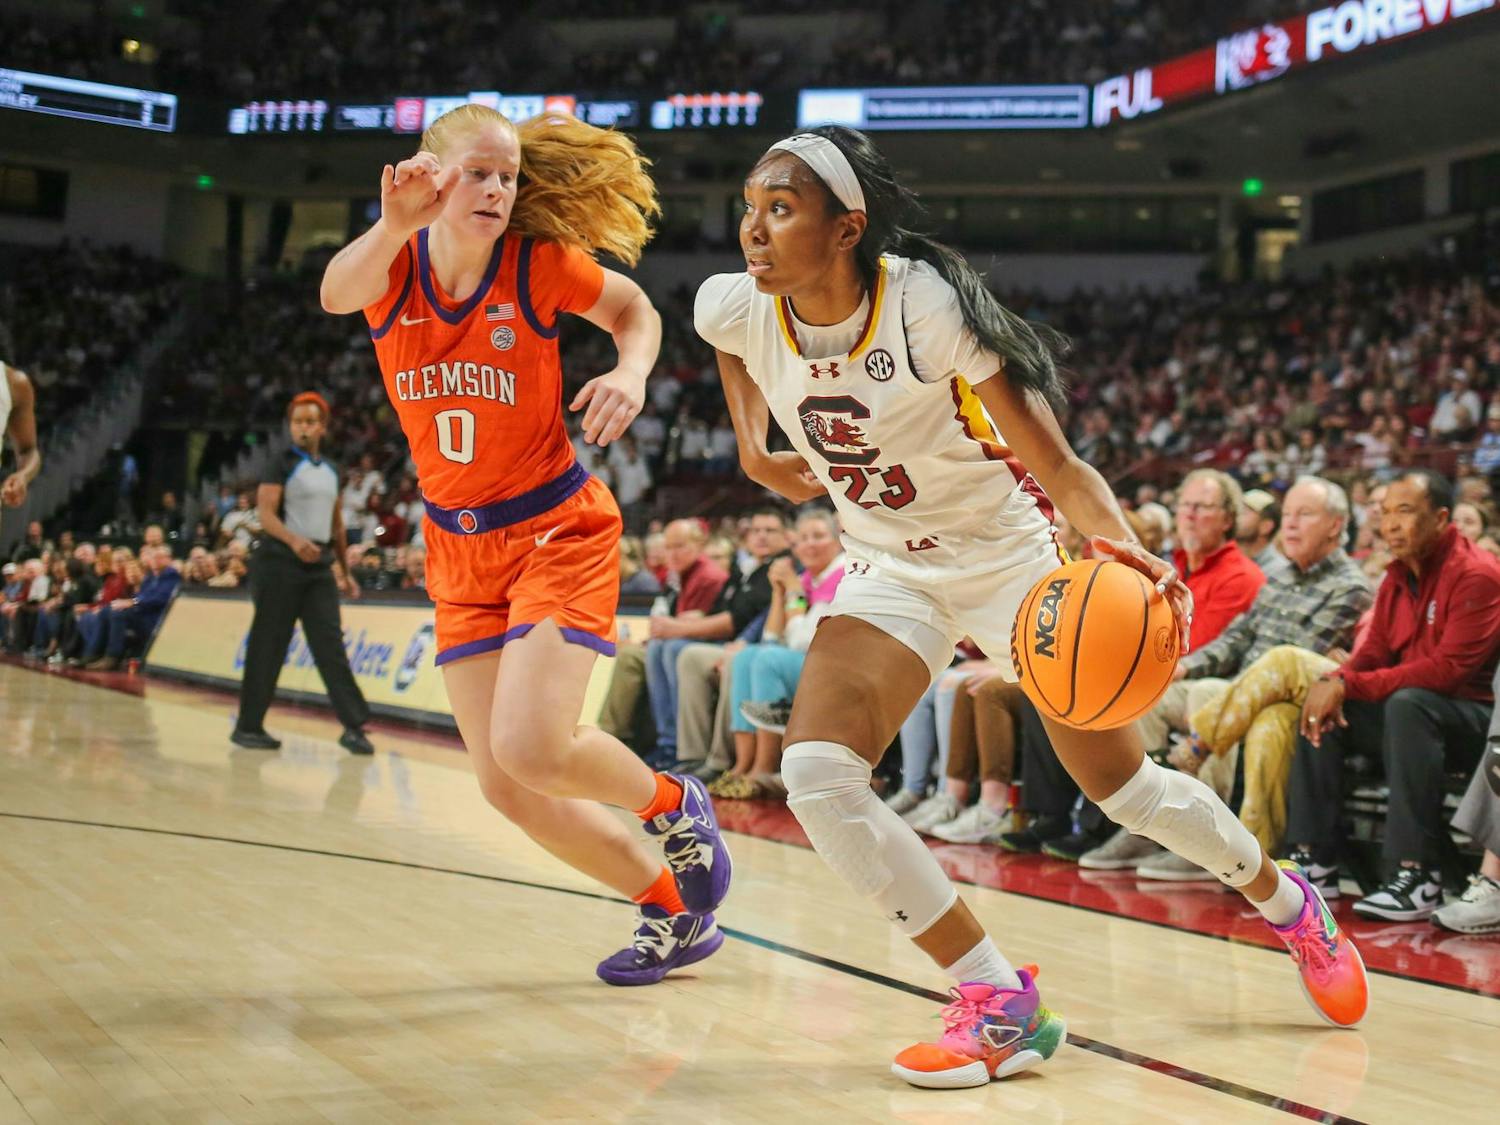 Junior guard Bree Hall drives the ball towards the baseline during South Carolina’s game against Clemson at Colonial Life Arena on Nov. 16, 2023. Hall had five rebounds and one assist in the Gamecocks' 109-40 win over the Tigers.